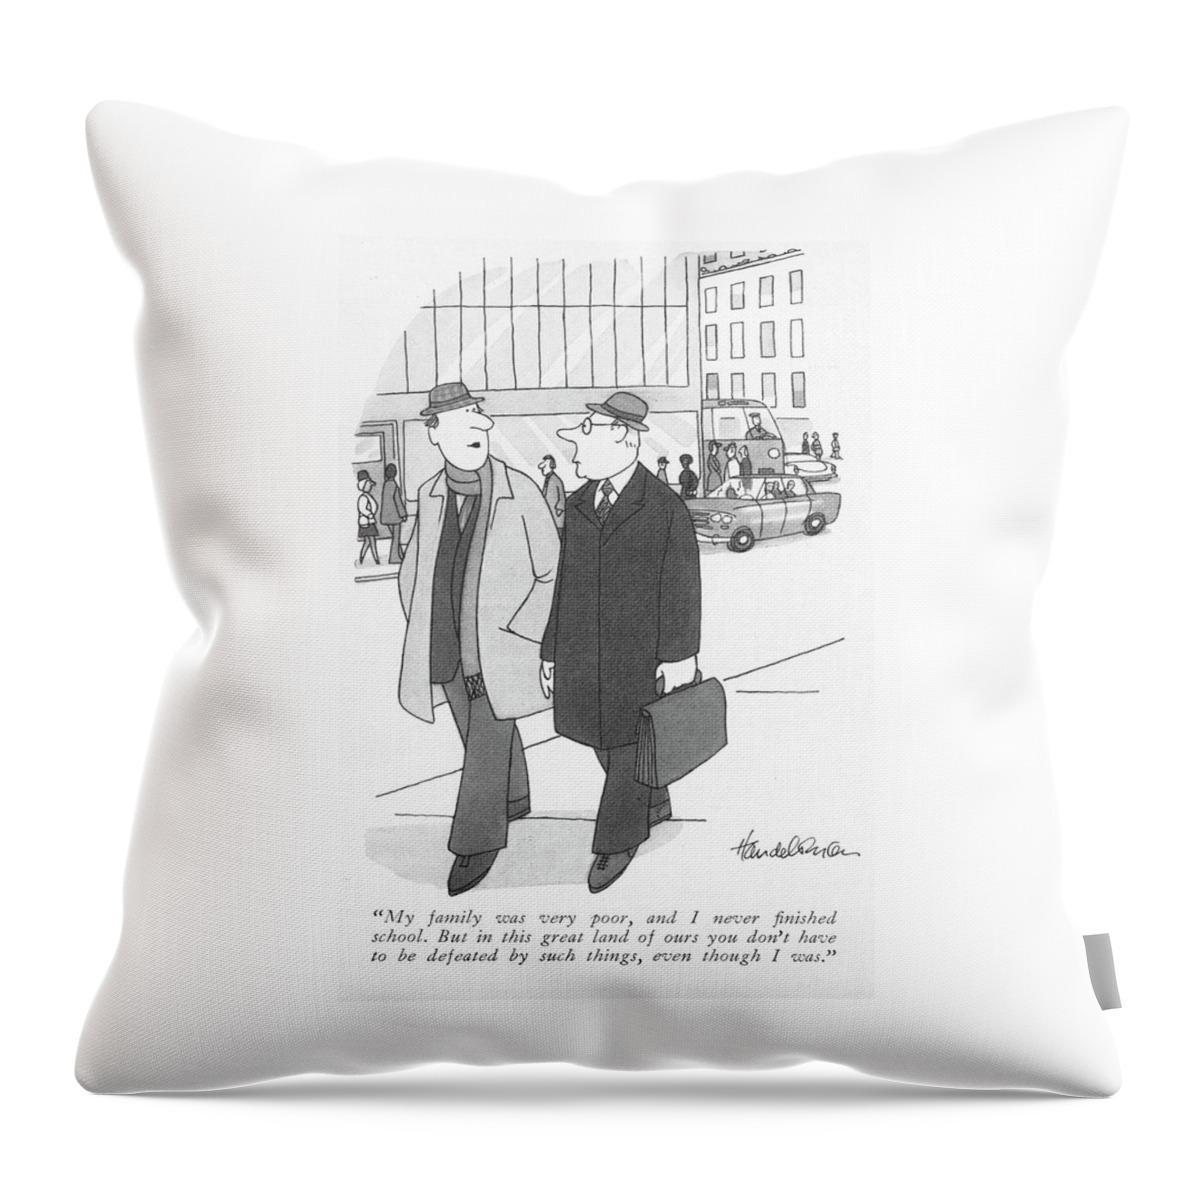 You Don't Have To Be Defeated Throw Pillow